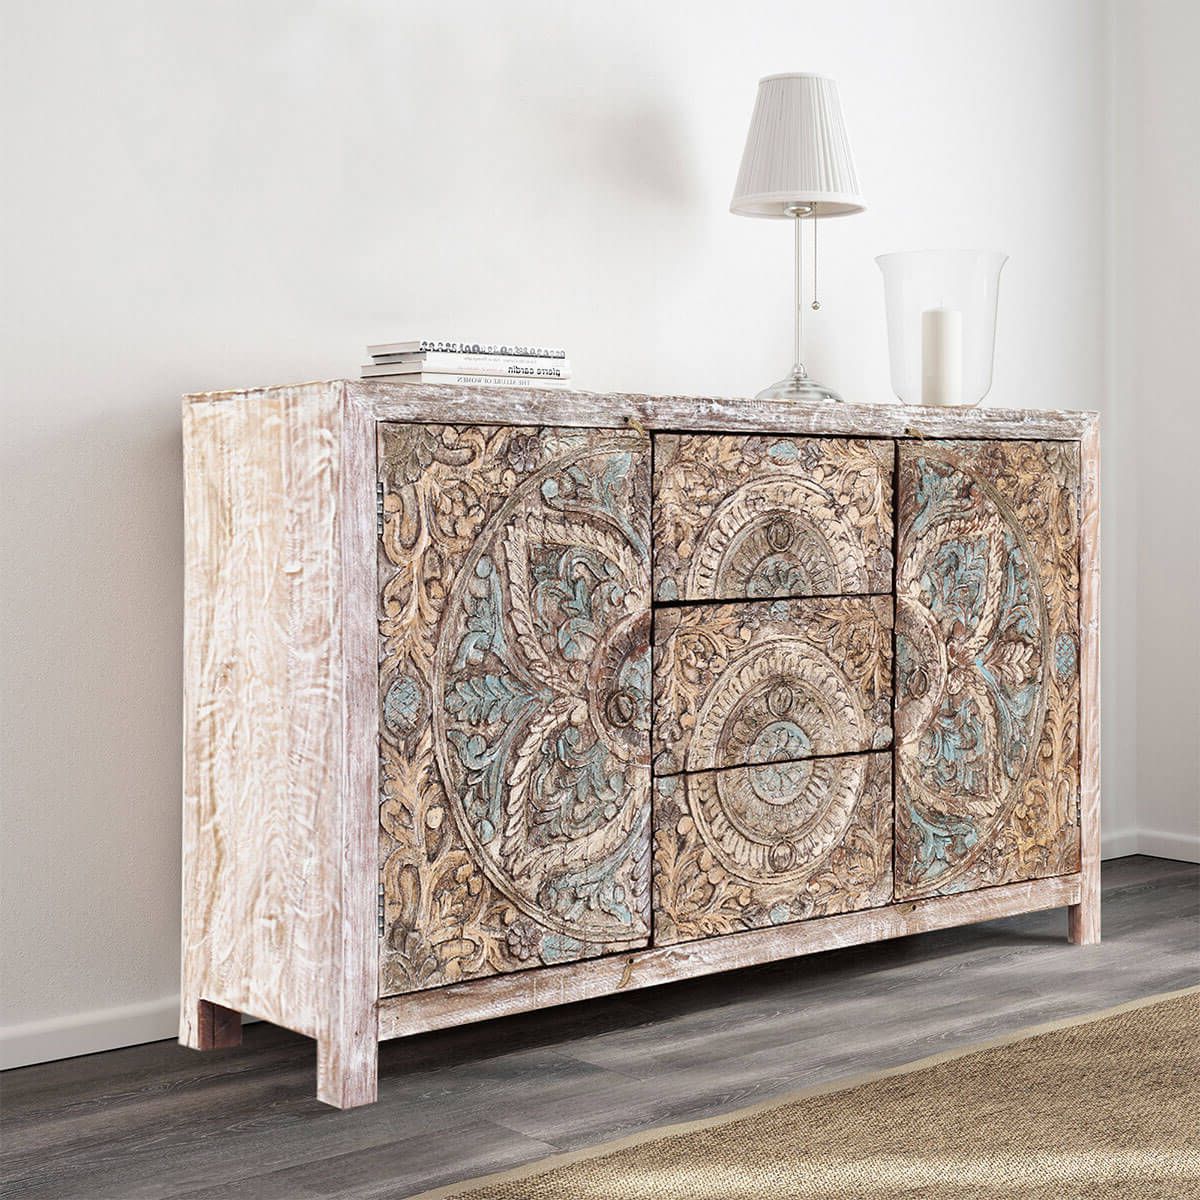 Avenal Floral Mandalas Solid Wood Hand Carved Accent Buffet Cabinet Pertaining To Avenal Sideboards (View 6 of 20)